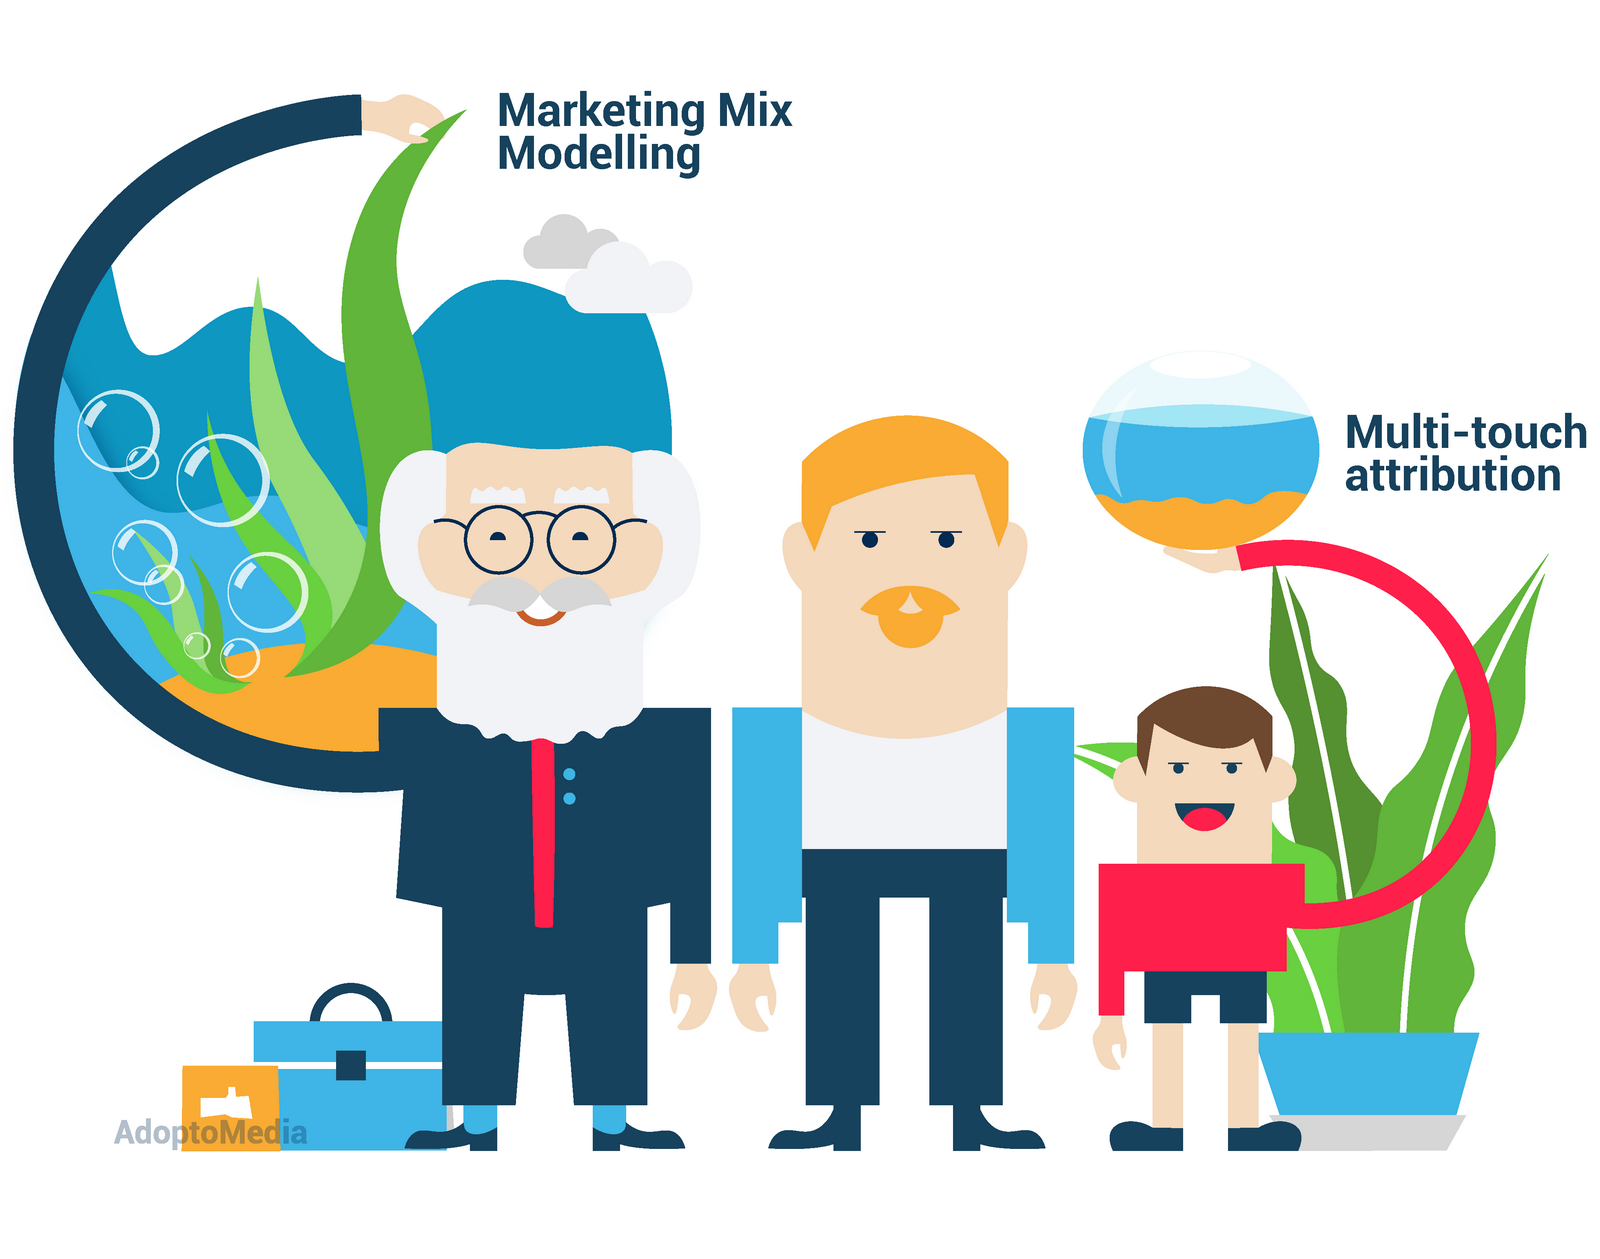 Marketing Mix Modelling, Attribution, Multi Touch Attribution, Unified Measurement Approach, advantages and disadvantages of Marketing Mix Modelling and Attribution, effective marketing measurement, marketing measurement challenges, AdoptoMedia